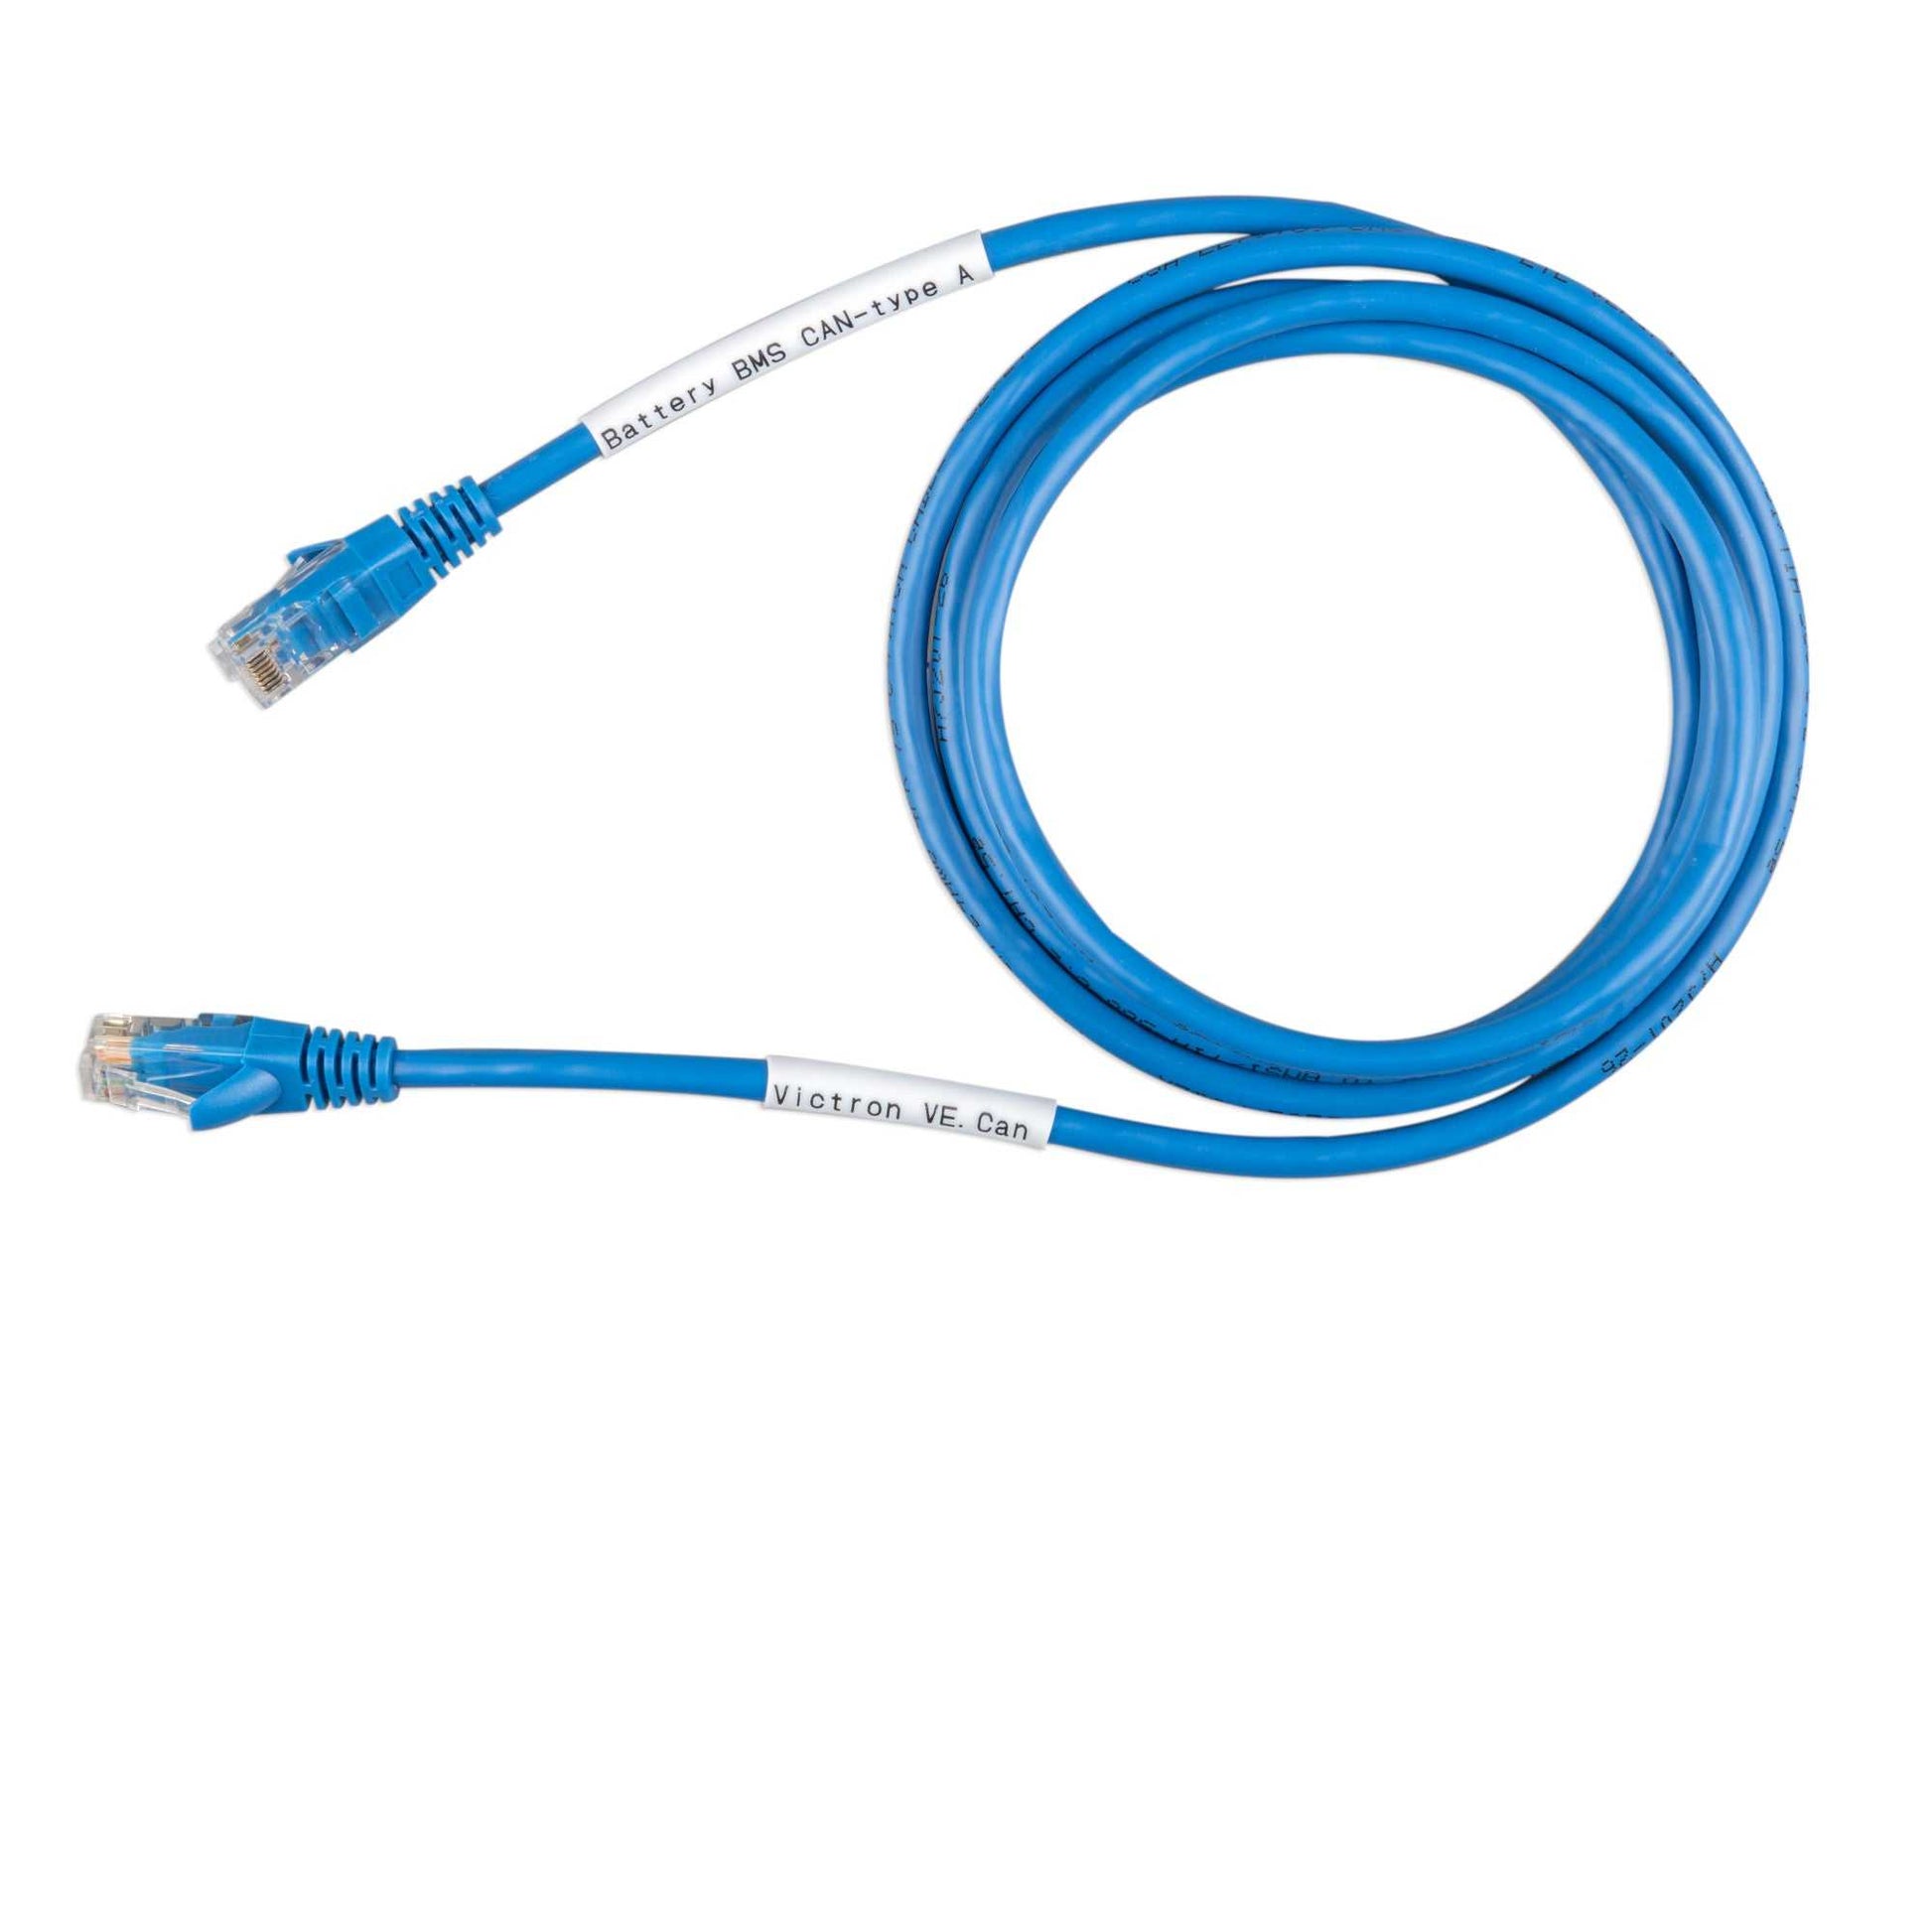 VE.CAN to CAN-bus BMS type A Cable